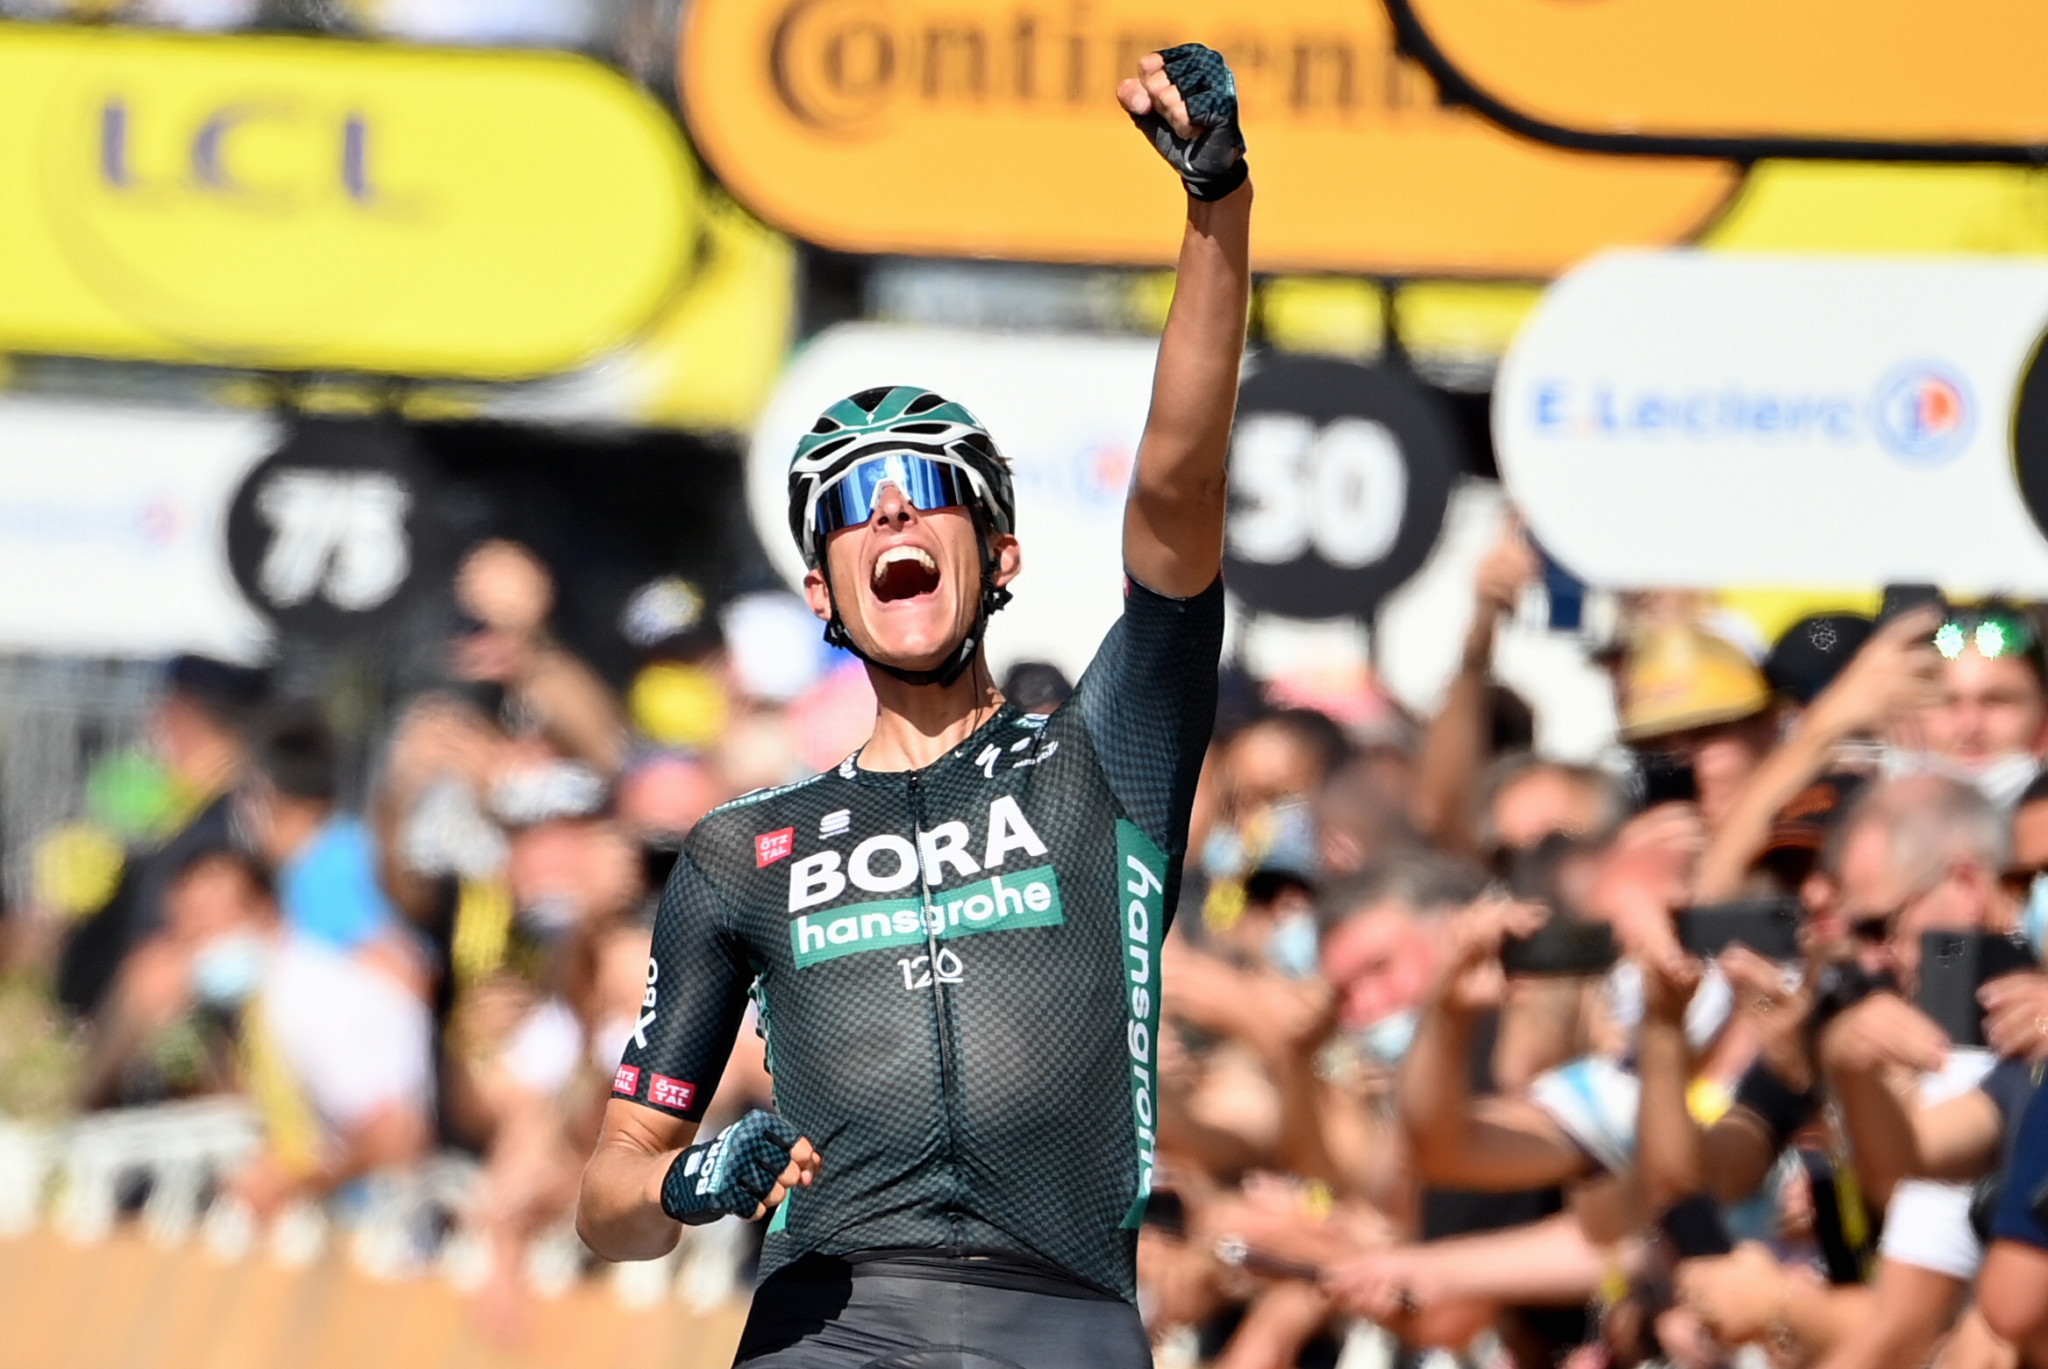 Politt pulls away from fast breakaway to win stage 12 of Tour de France